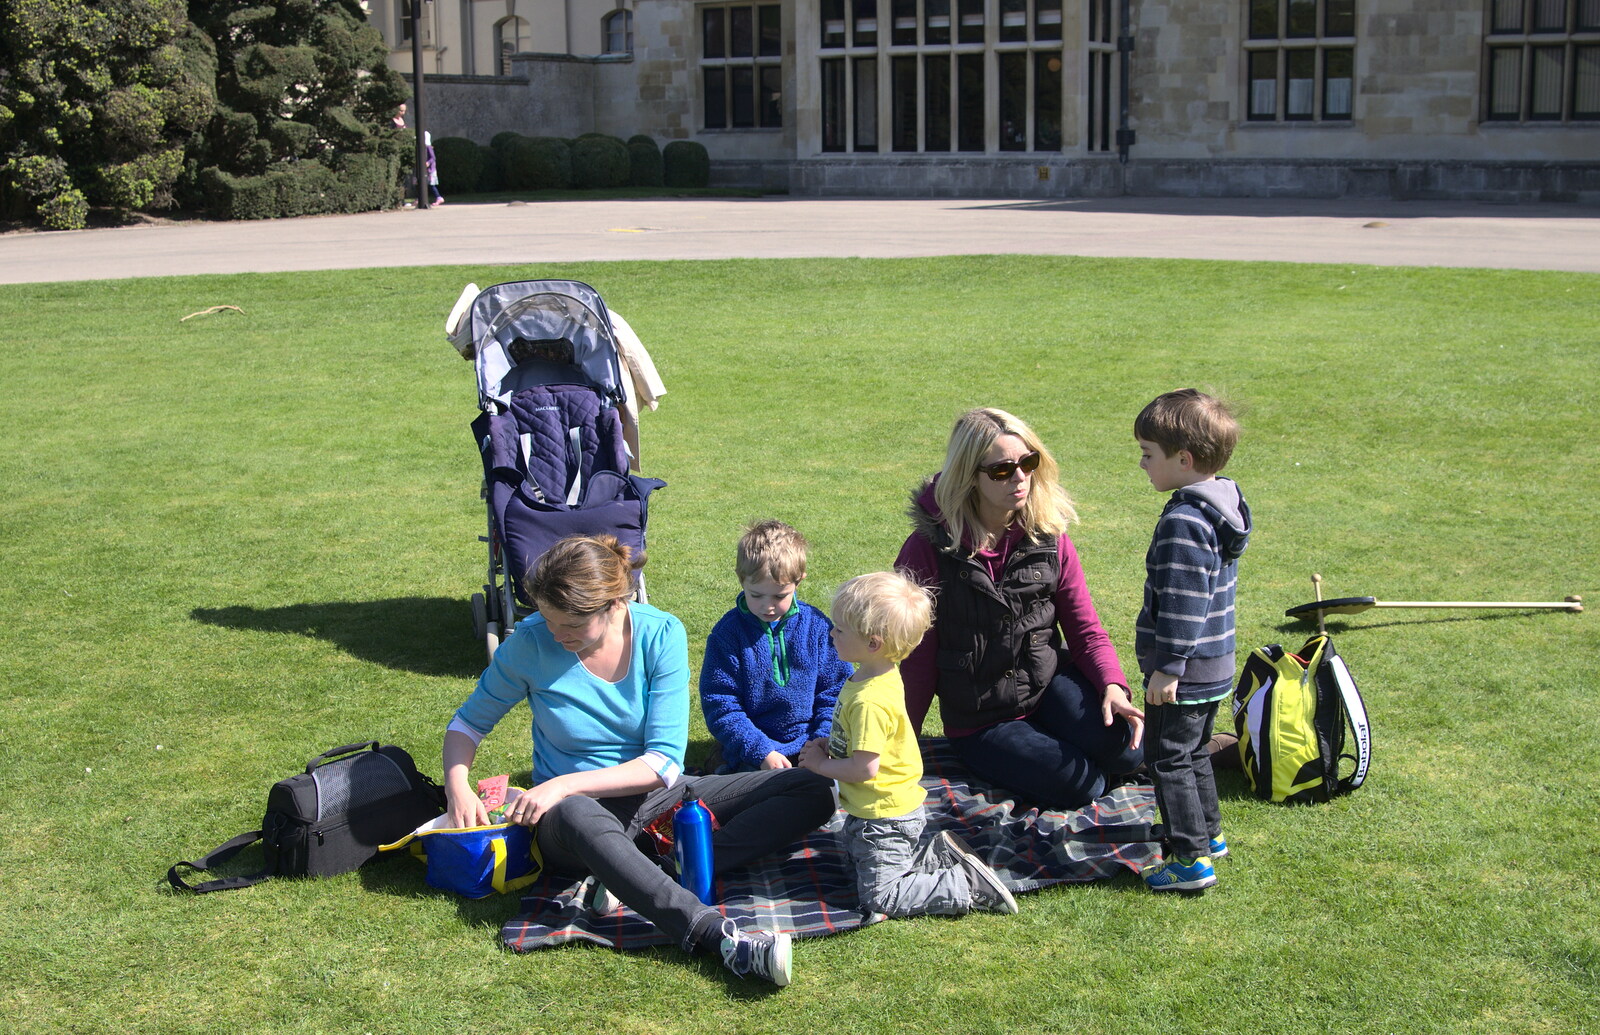 Time for a picnic on the lawn from A Trip to Audley End House, Saffron Walden, Essex - 16th April 2014